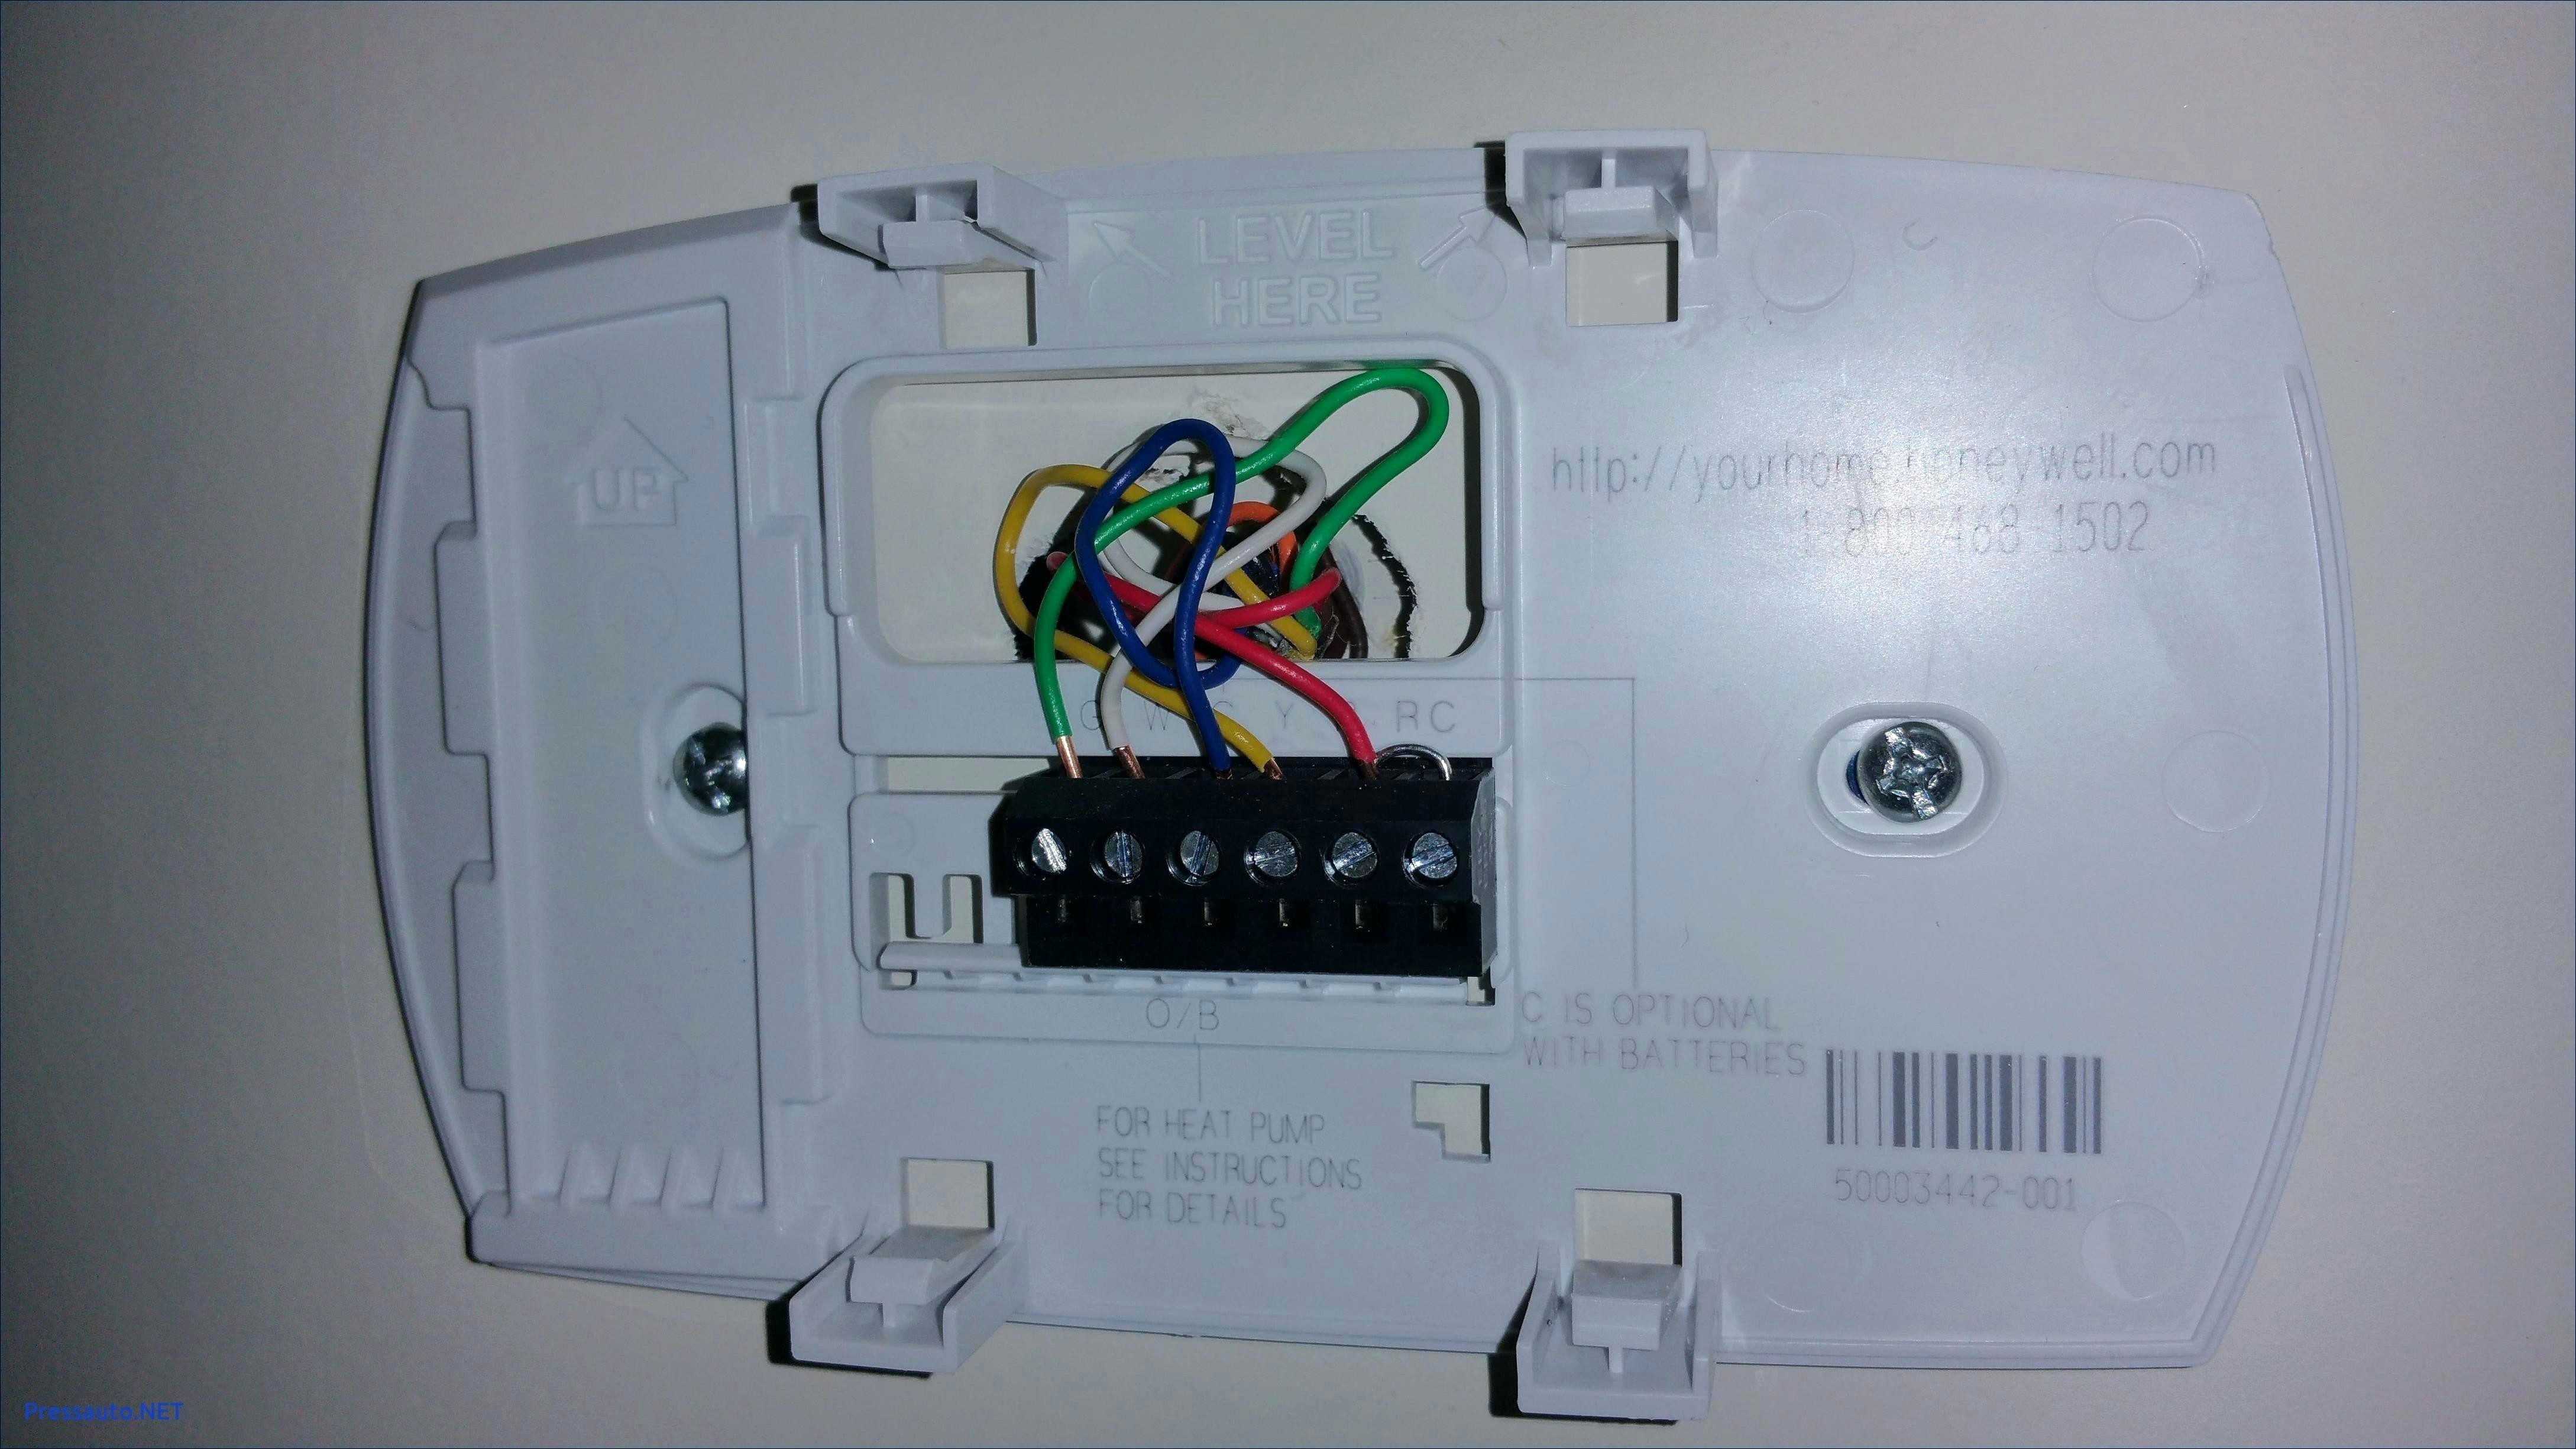 Dometic Single Zone Thermostat Wiring Diagram | Wiring Diagram - Dometic Rv Thermostat Wiring Diagram